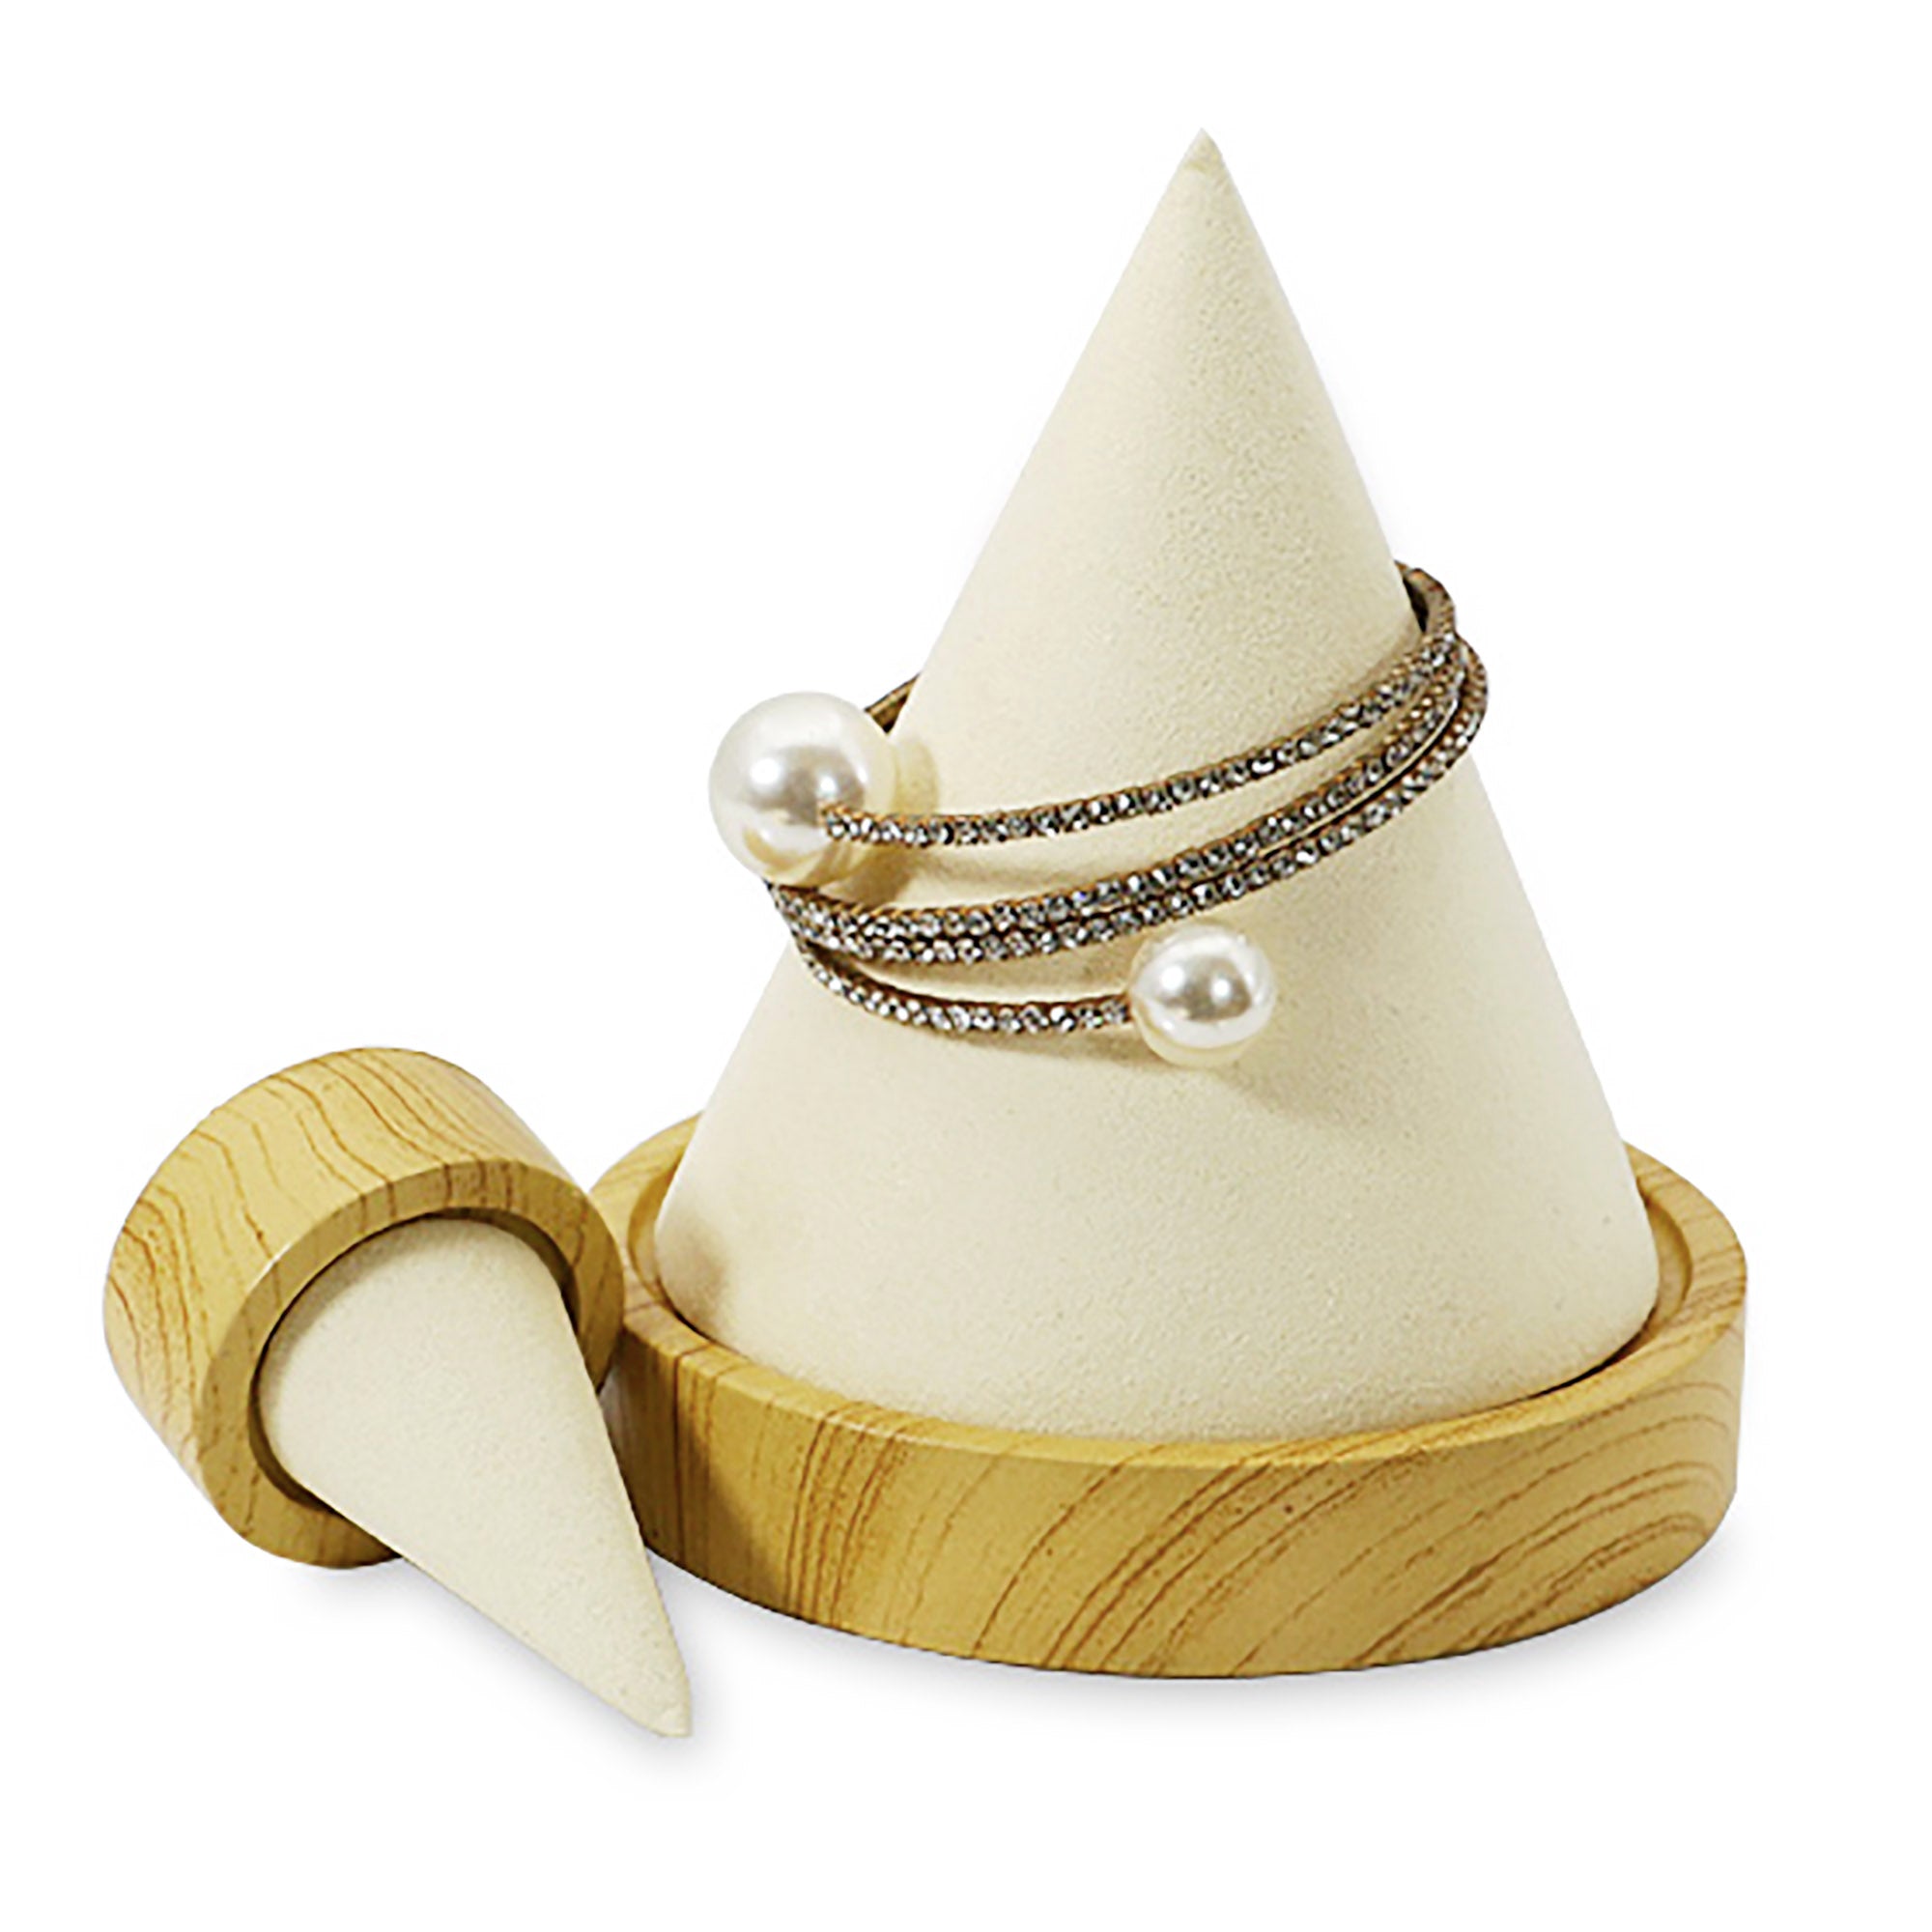 Cones Shape Ring Bangle Display Jewelry Stand Vintage Gift Home Deco Decoration Design Active